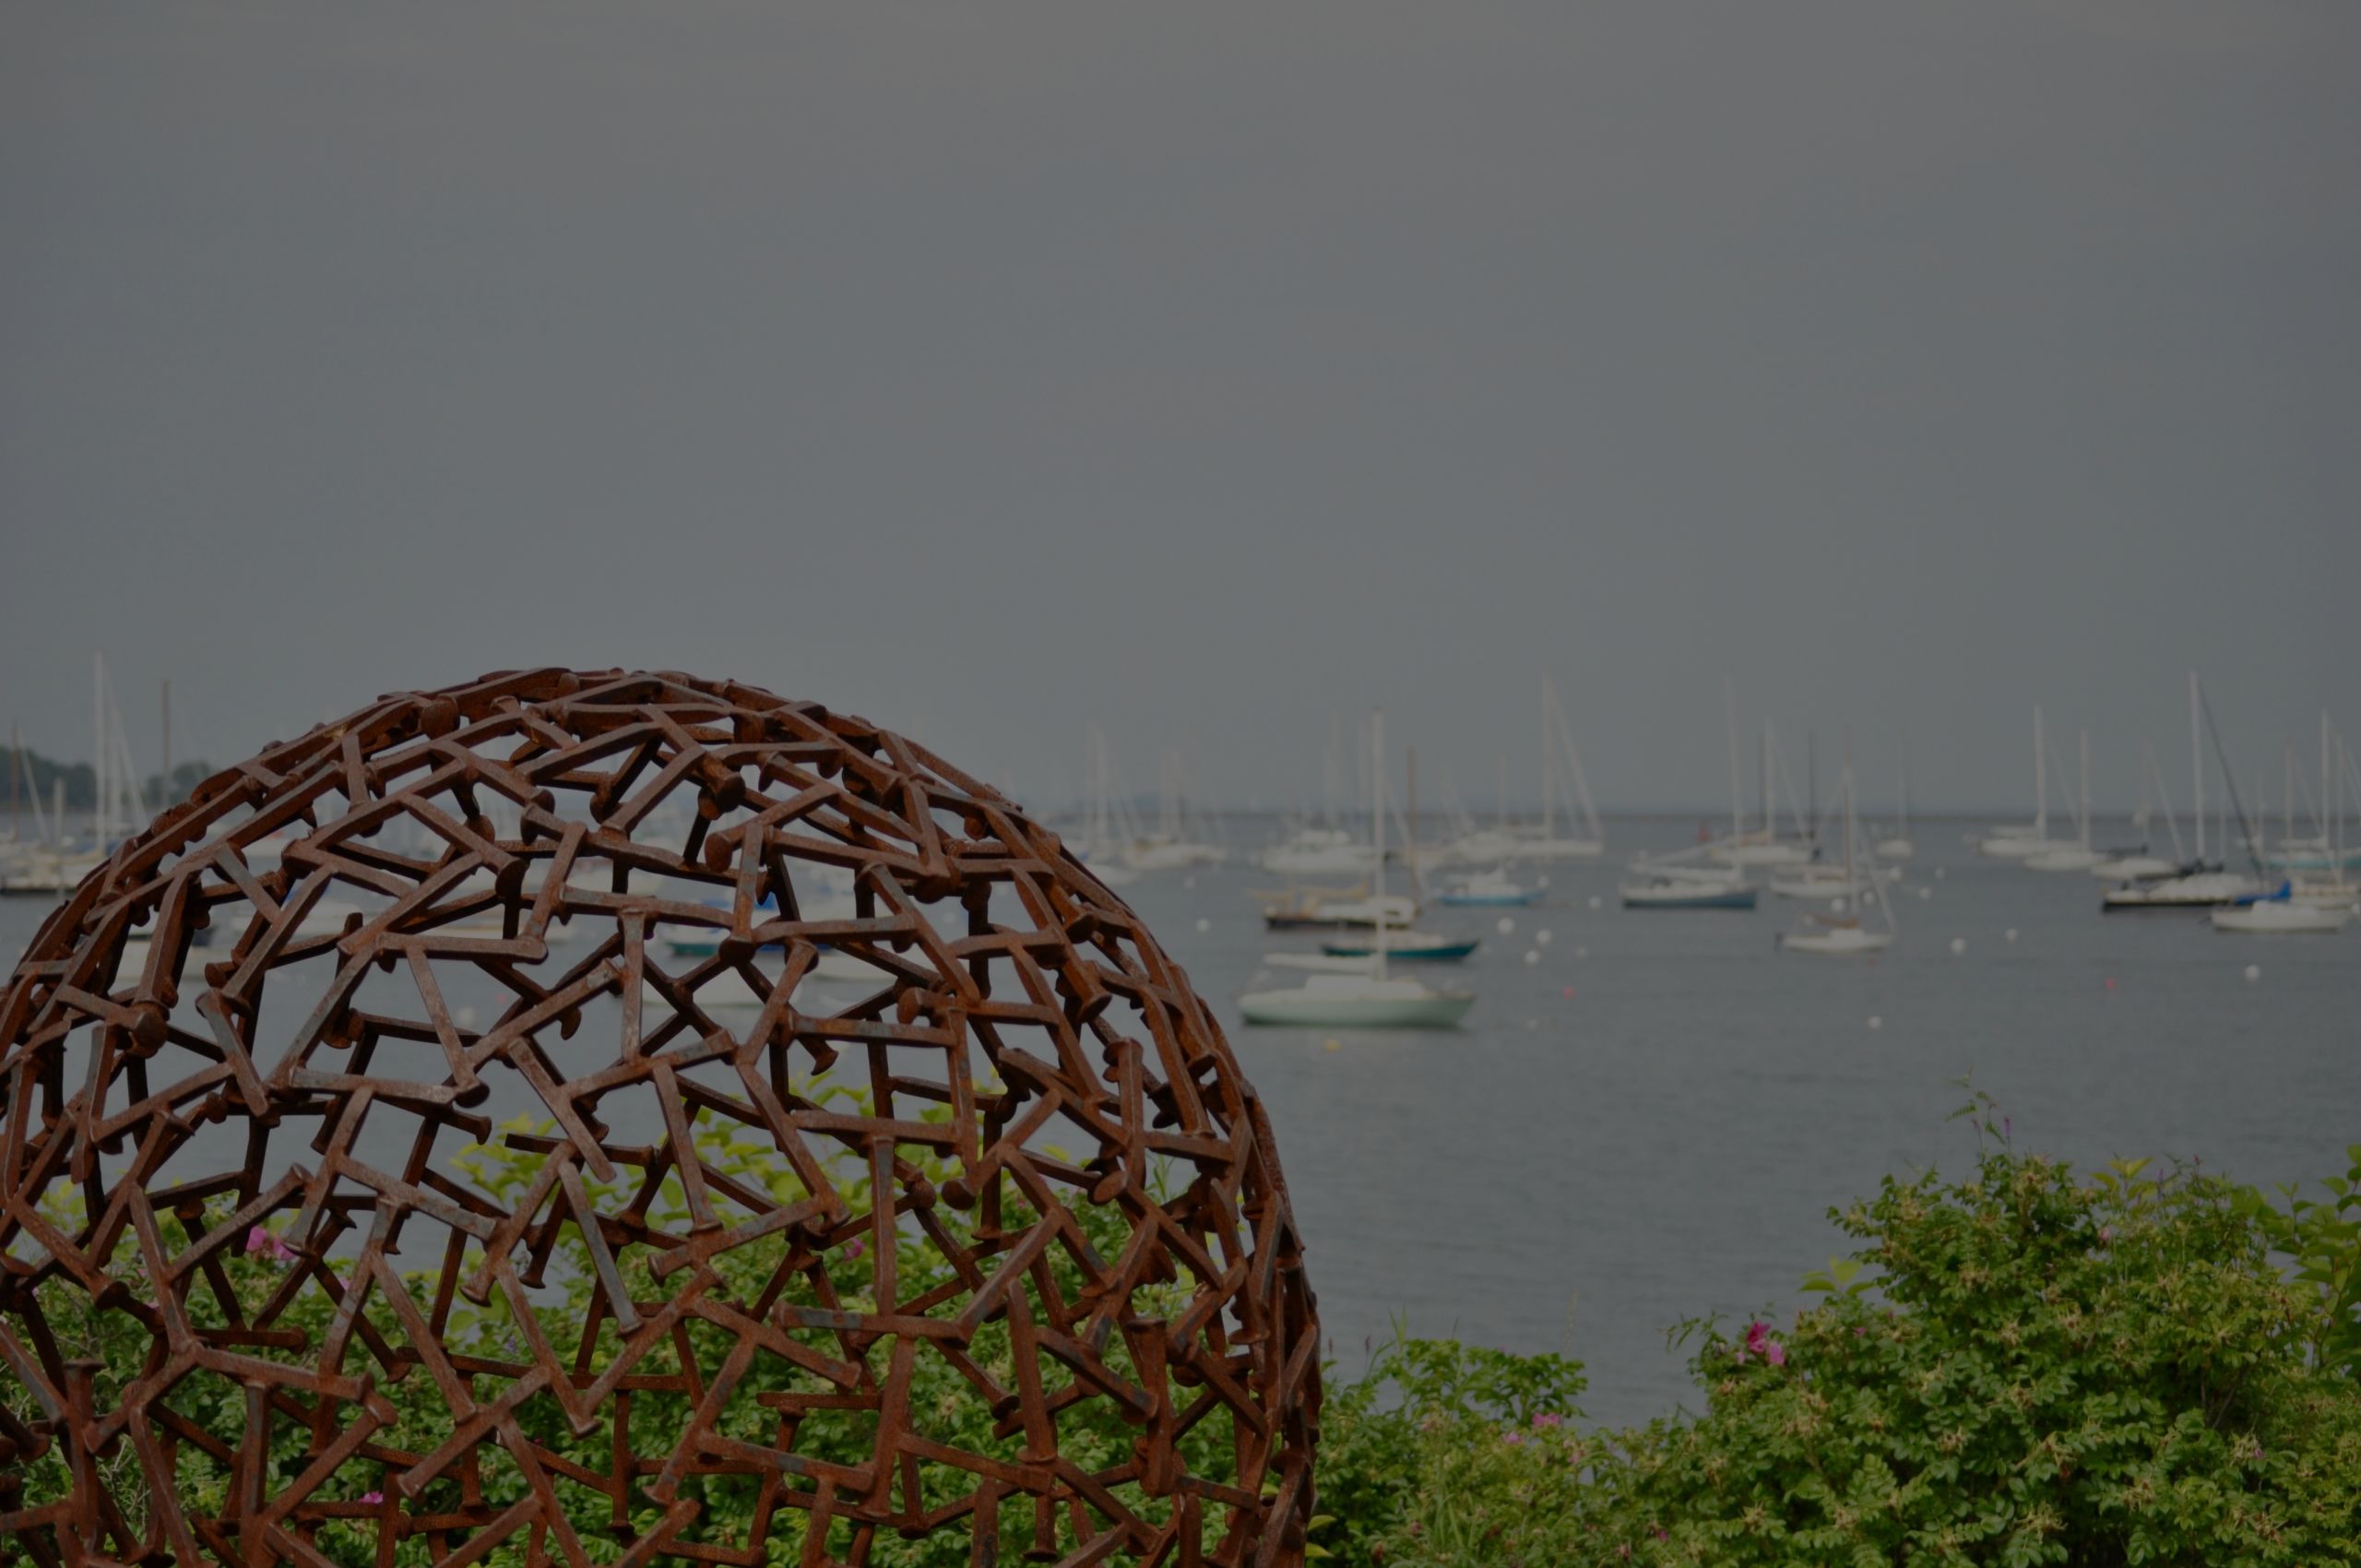 Rail Art in the Rockland Harbor